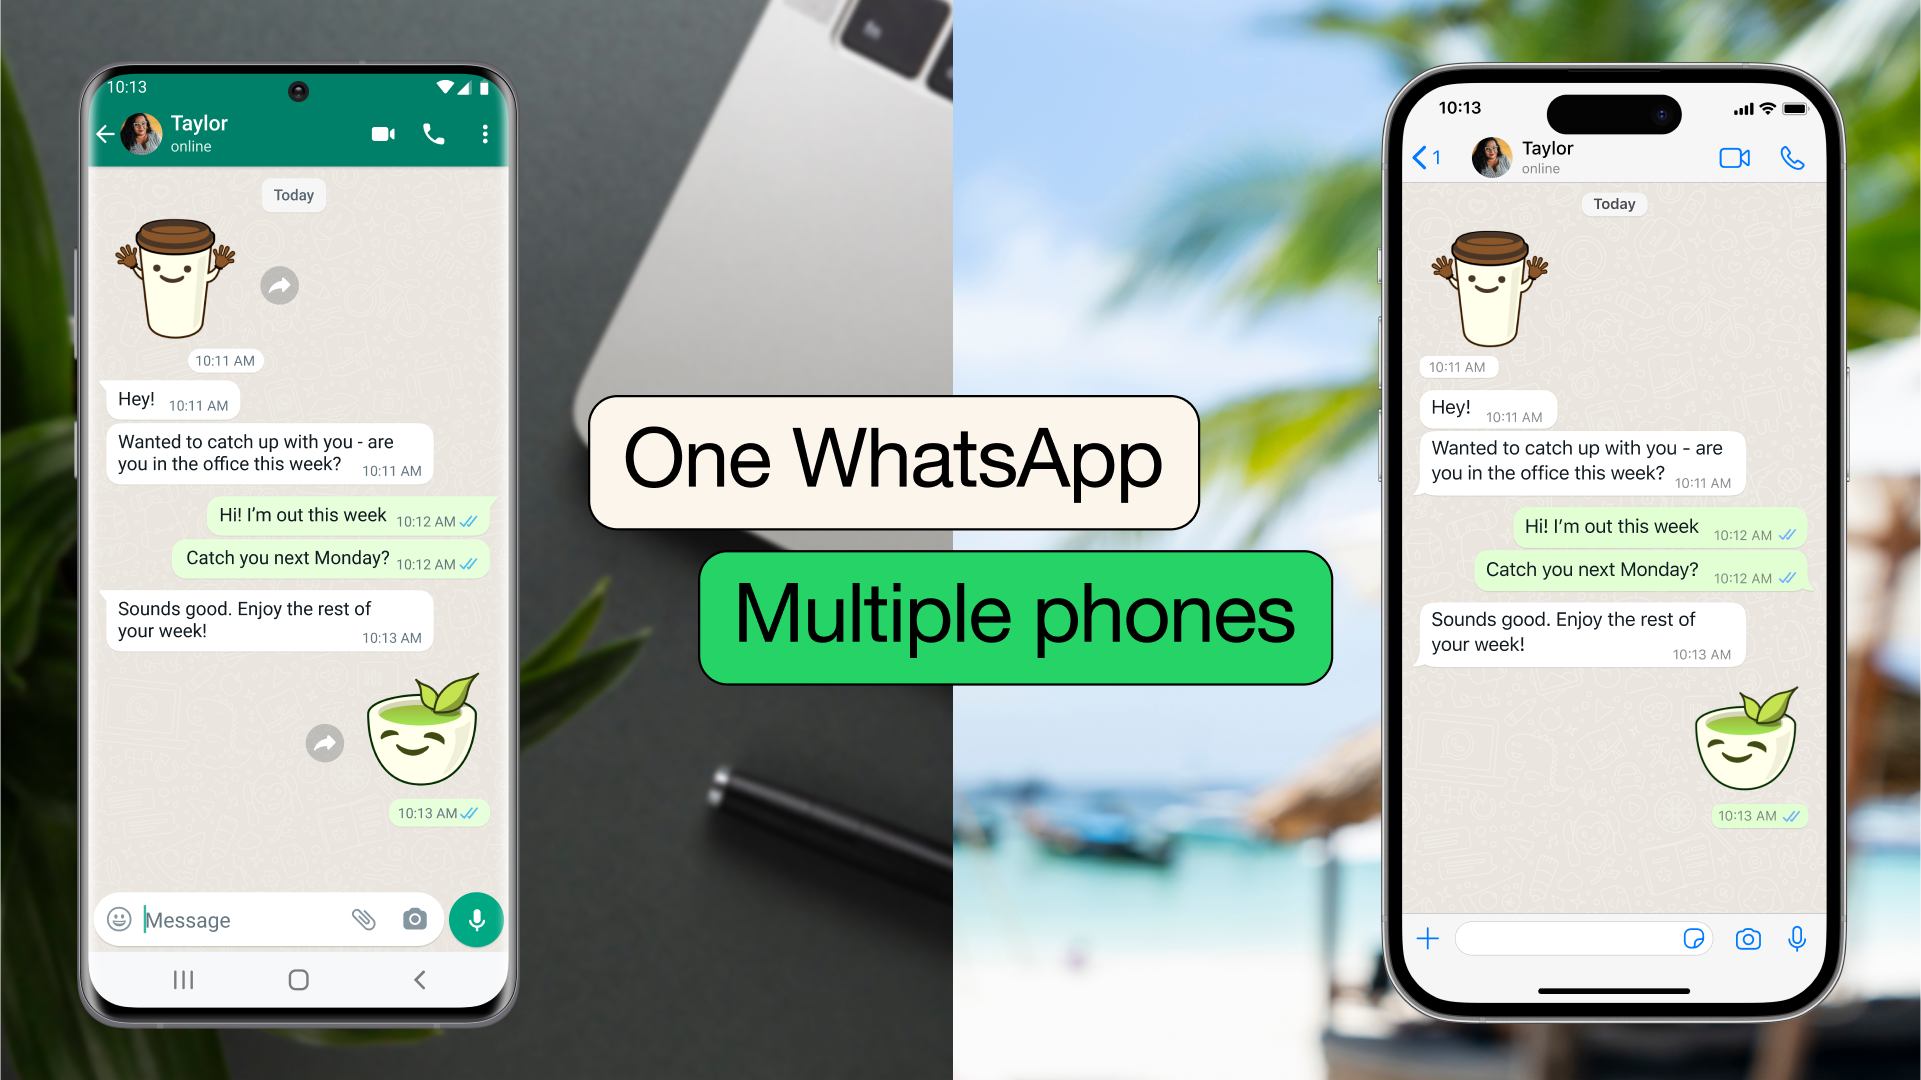 Now Users Can Use the Same WhatsApp Account on Different Phones Simultaneously